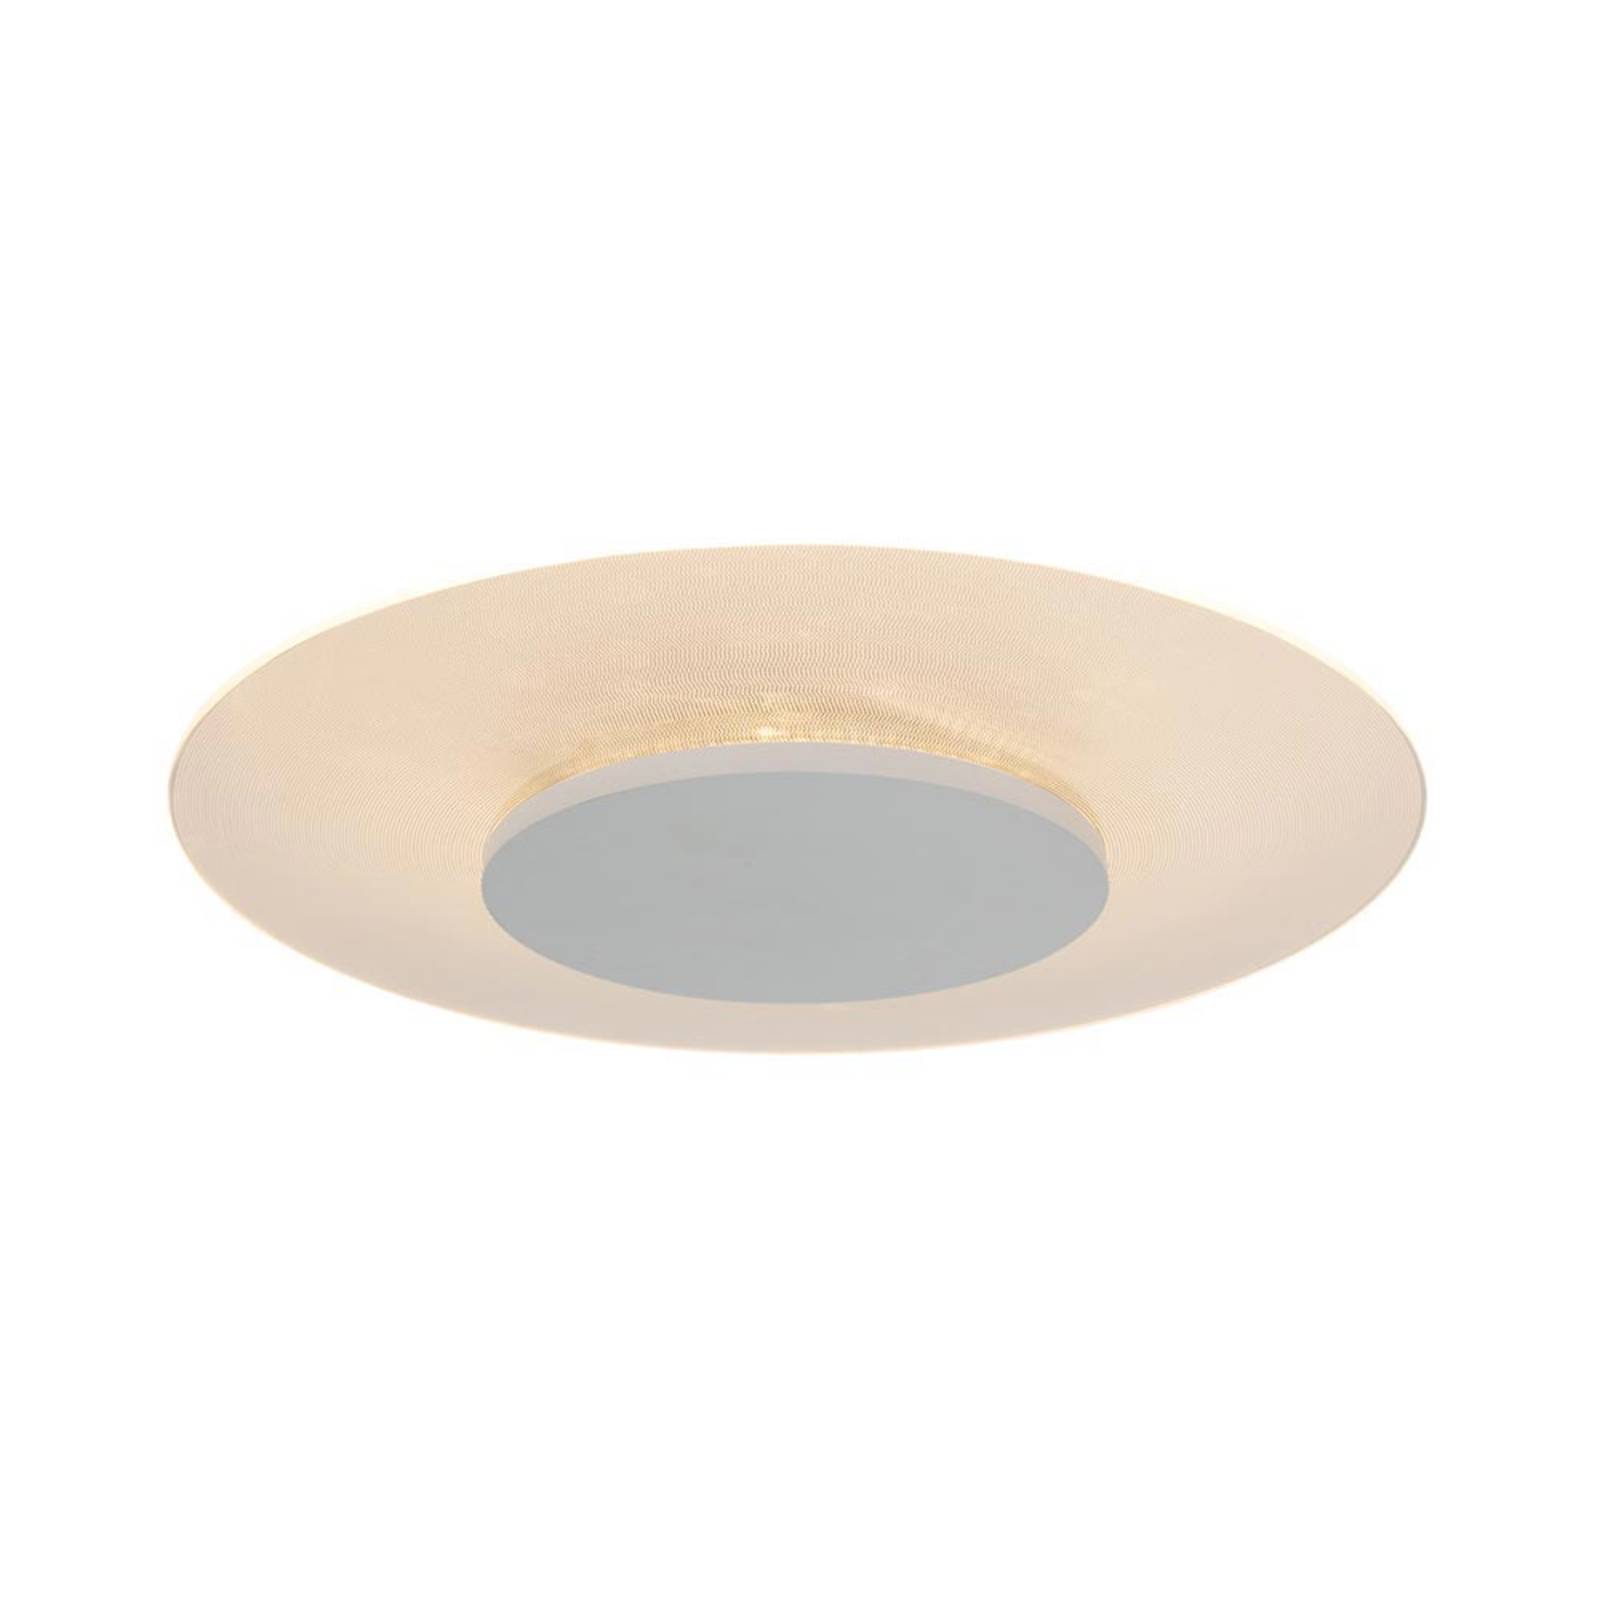 Image of Steinhauer Plafonnier LED rond Pikka blanc, dimmable 8712746106237